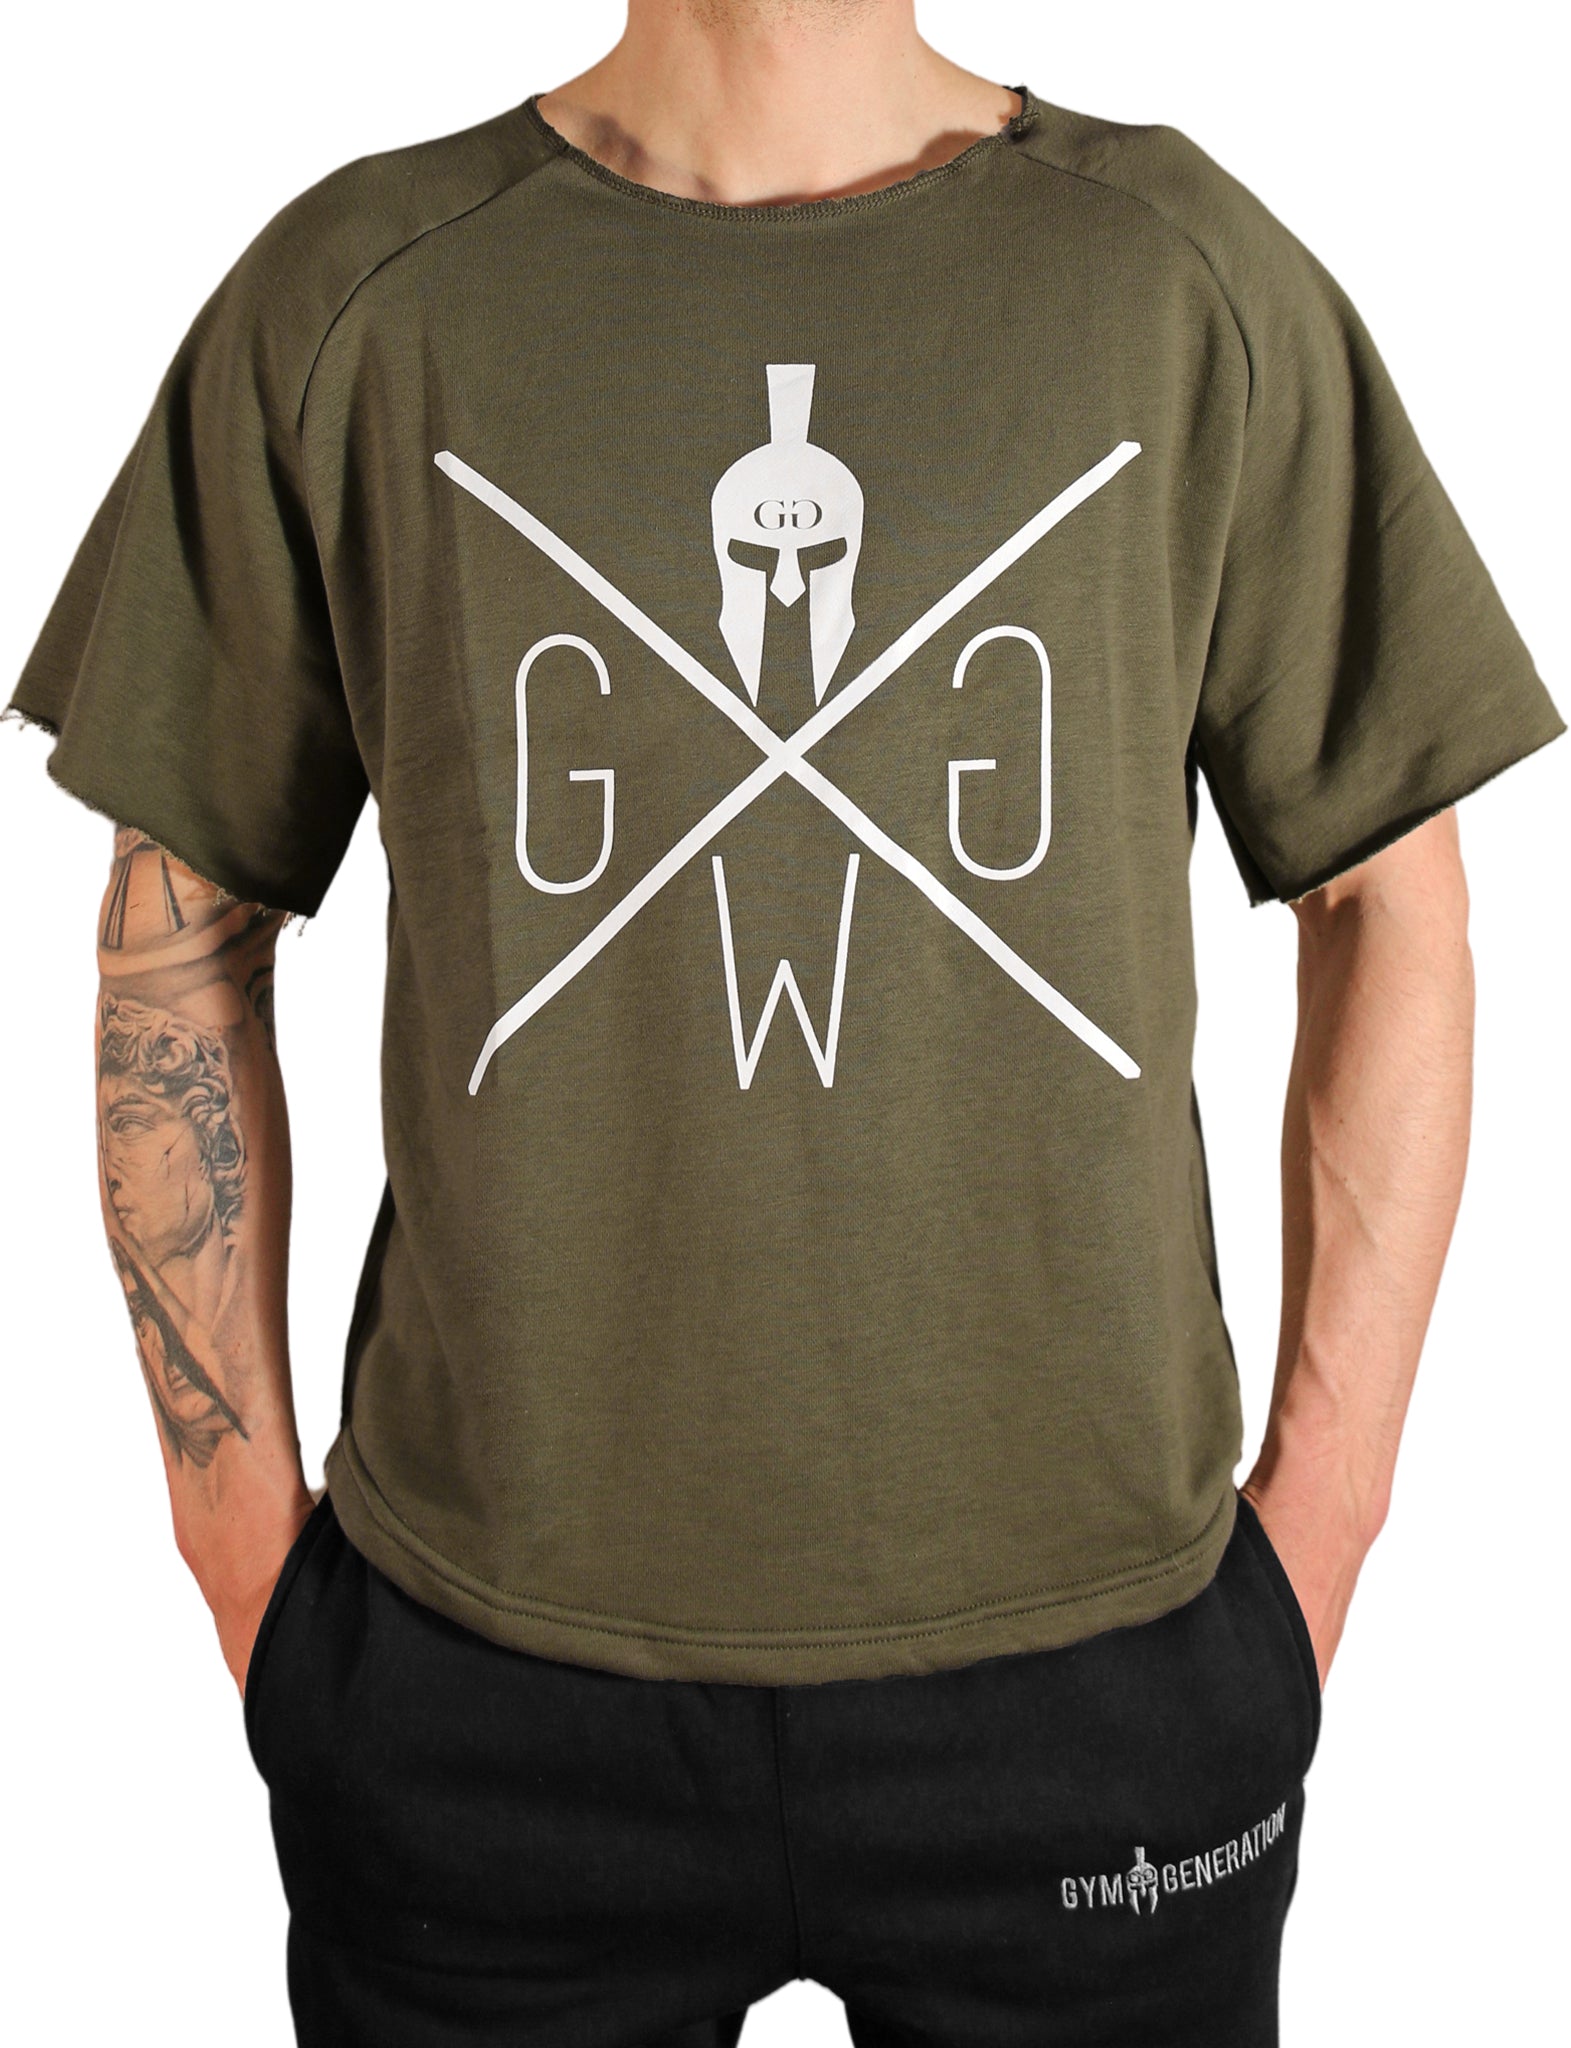 Oversized Pump Cover Shirt - Olive - Gym Generation®-7640171168524-www.gymgeneration.ch